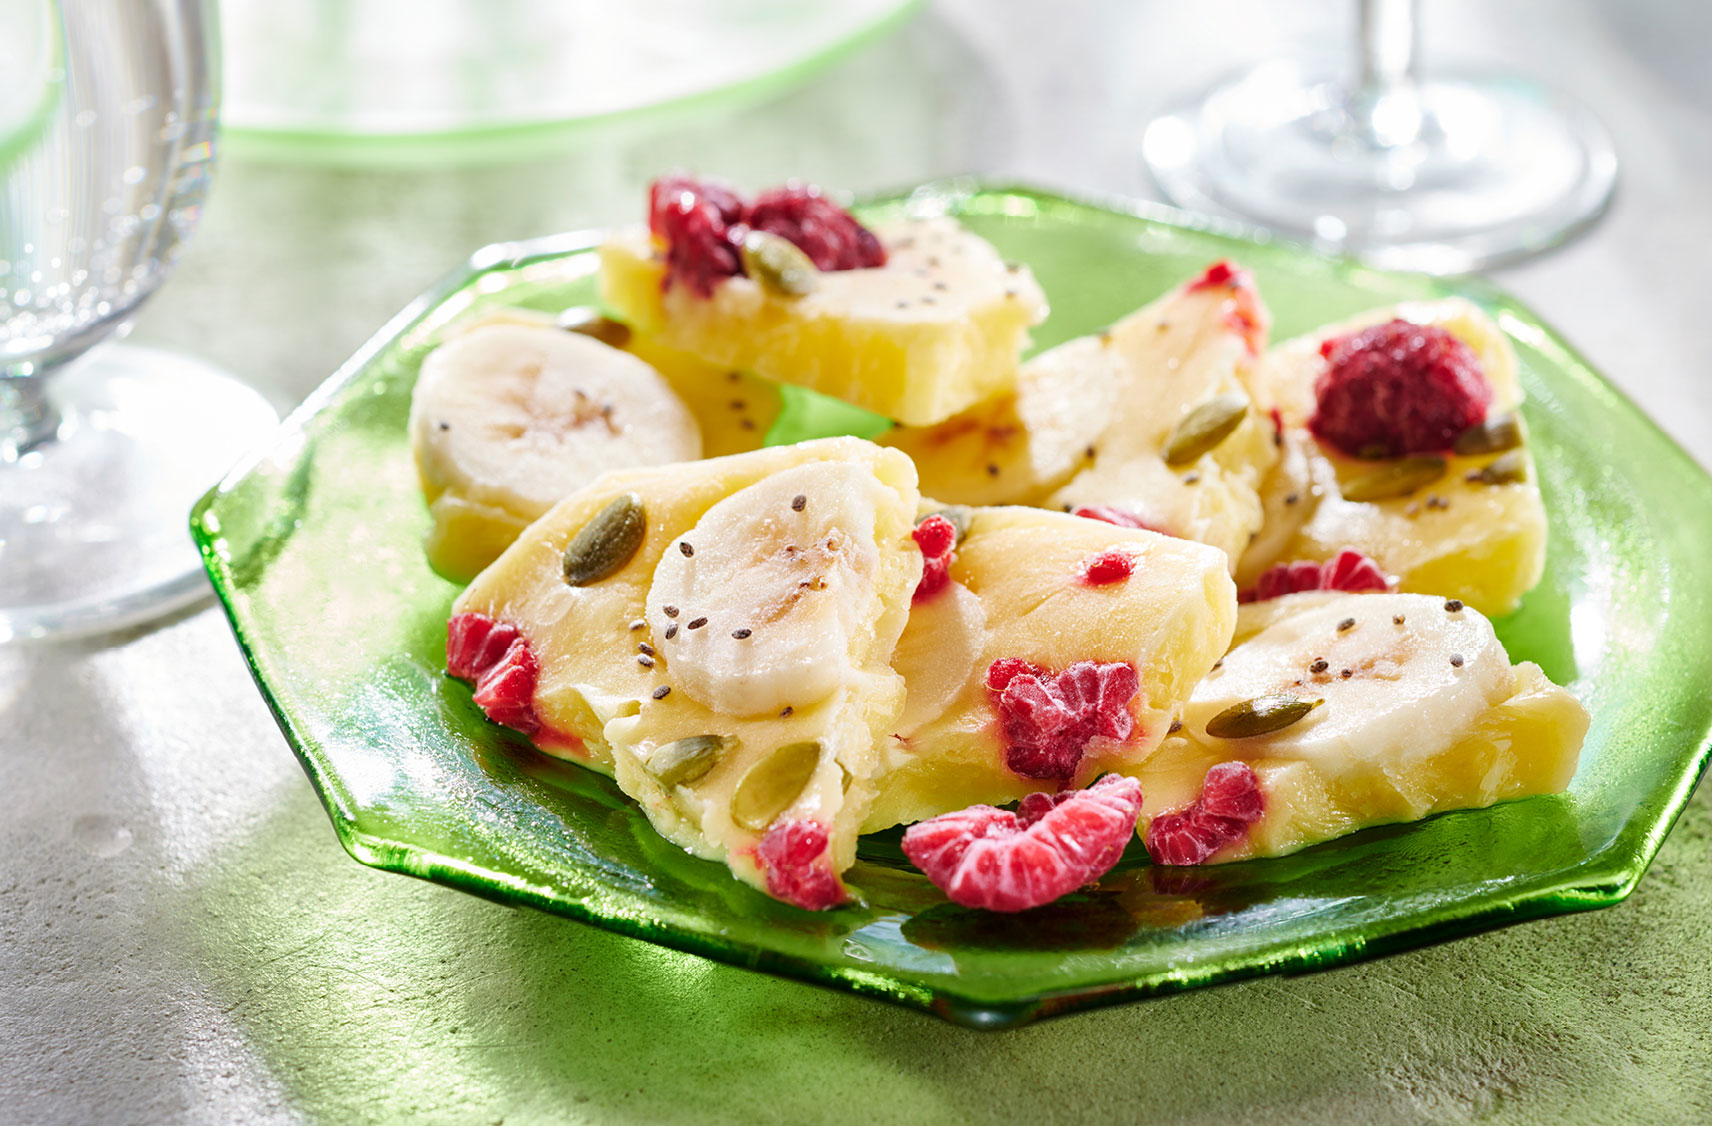 A glass plate filled with large pieces of frozen yogurt barks which contains slices of bananas, pieces of raspberries and pumpkin seeds.